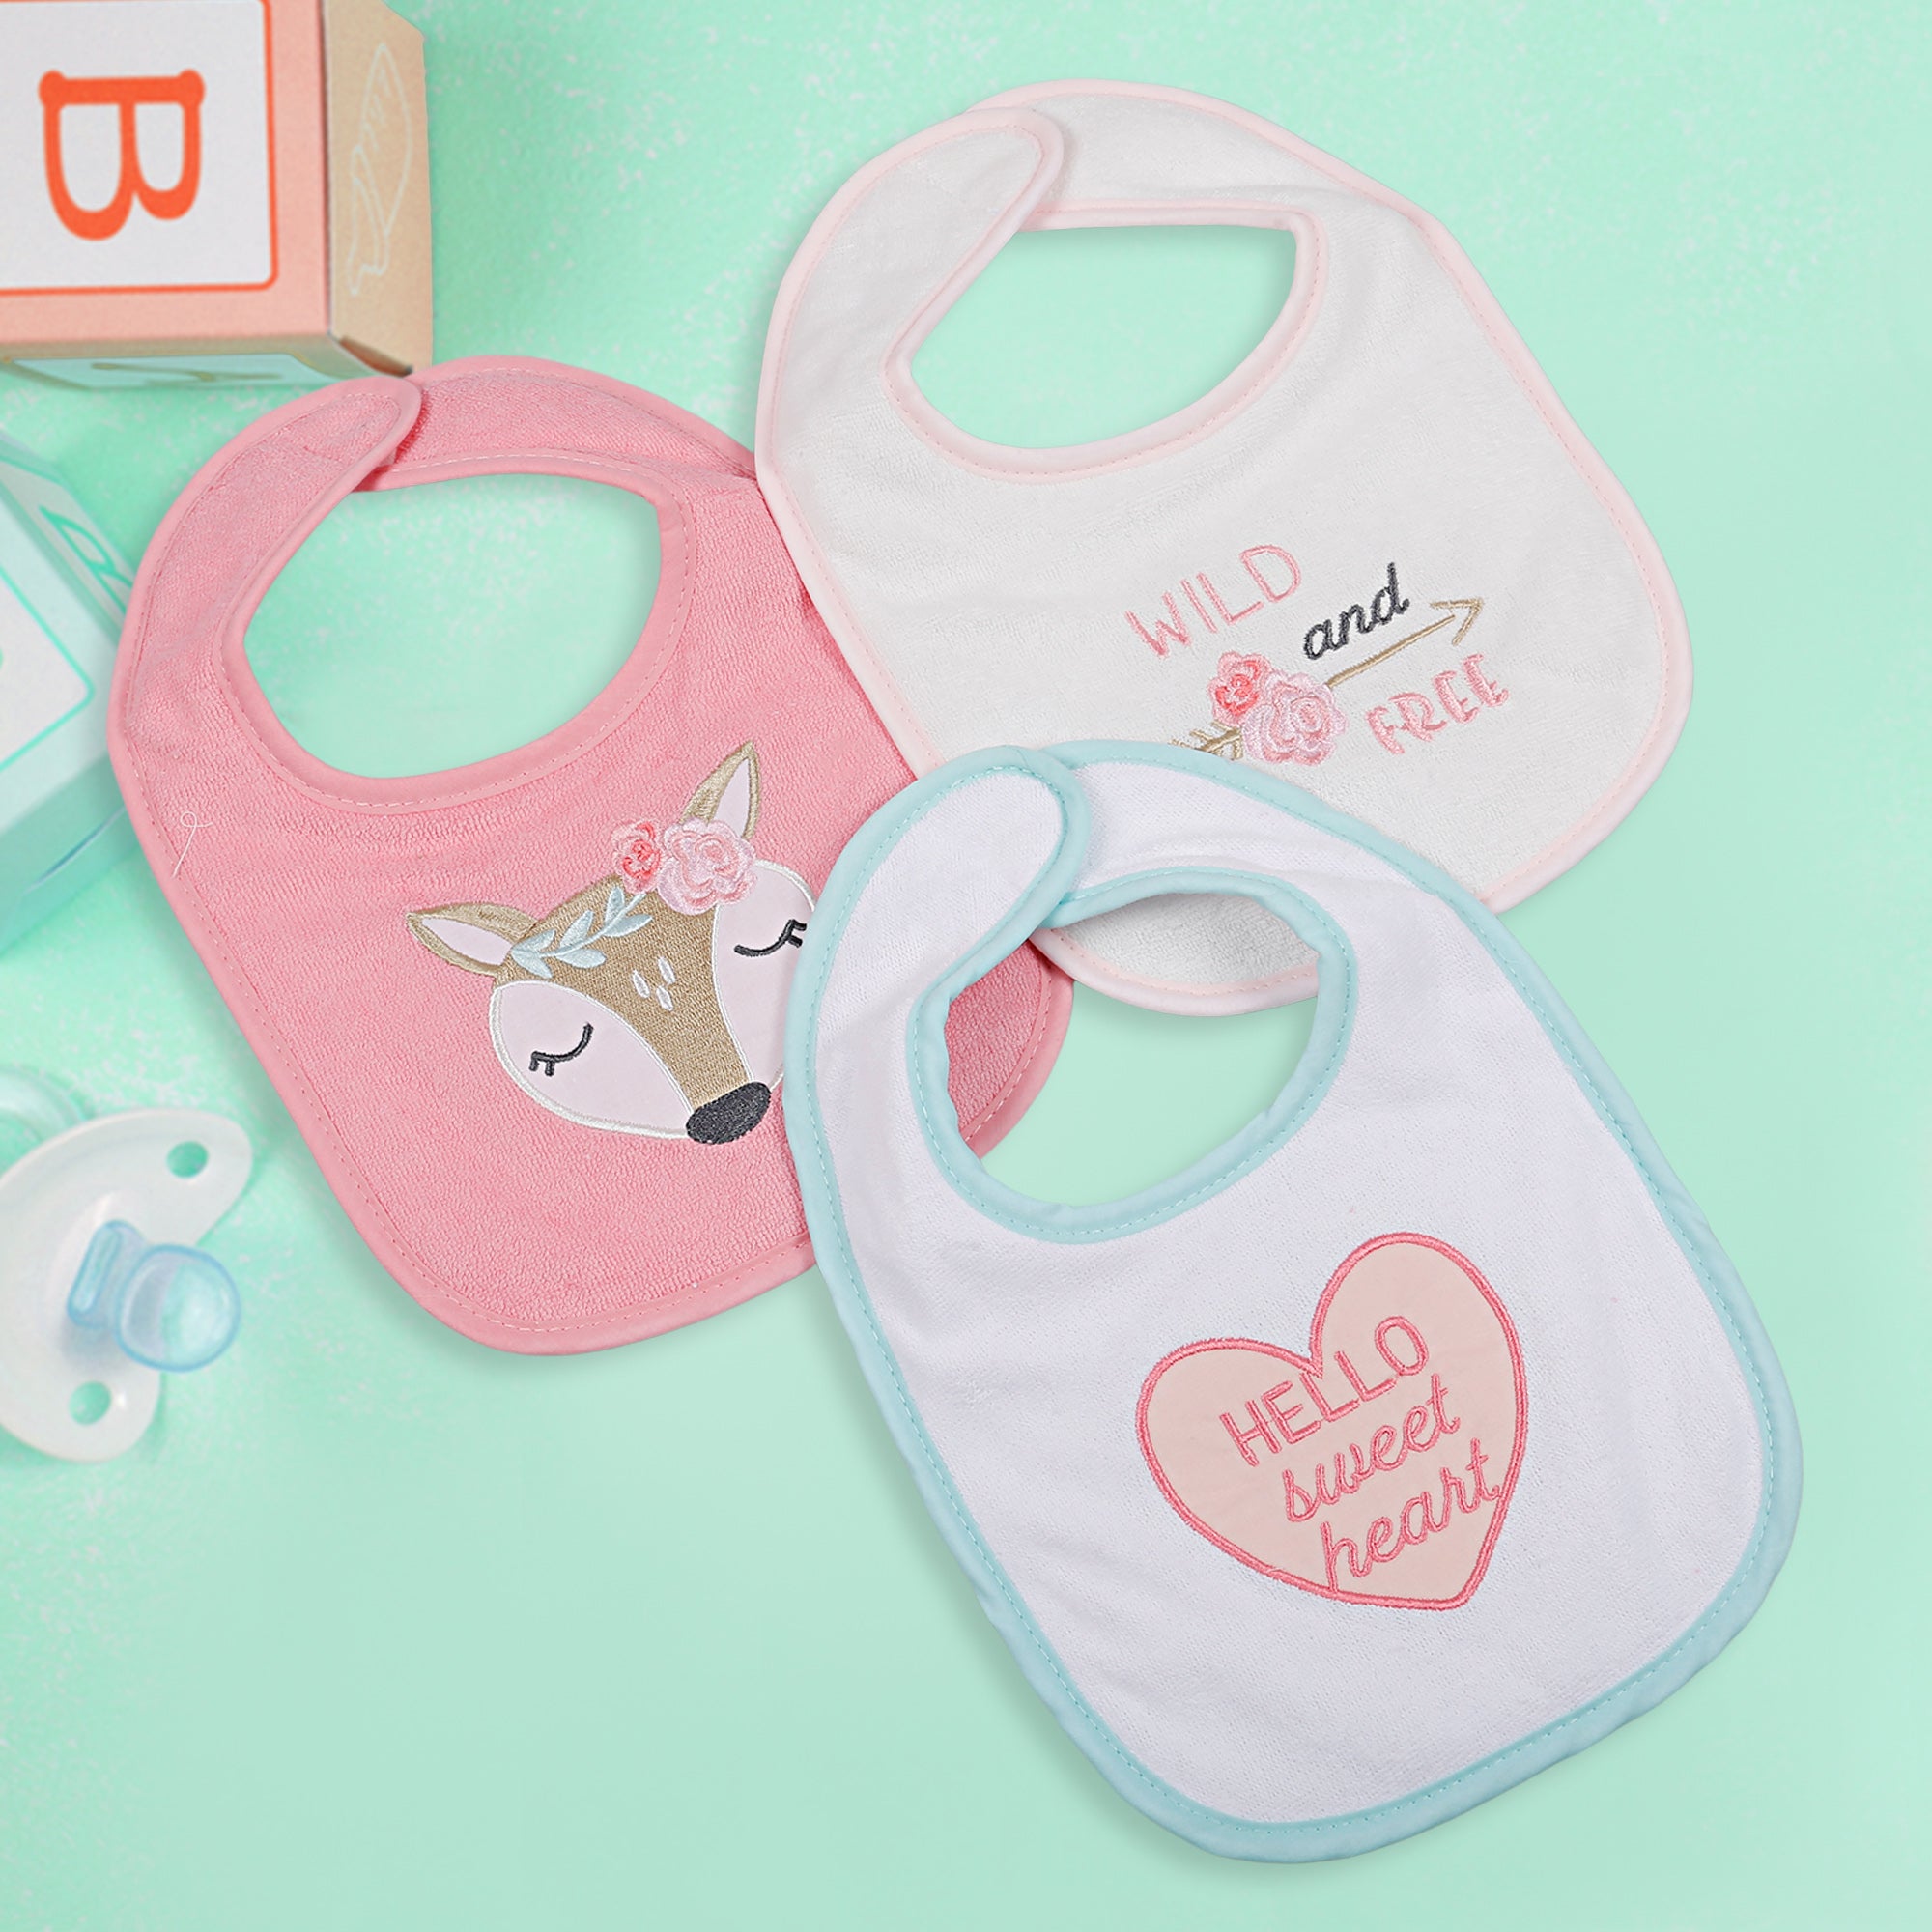 Feeding Bibs Pack Of 3 Wild And Free White And Pink